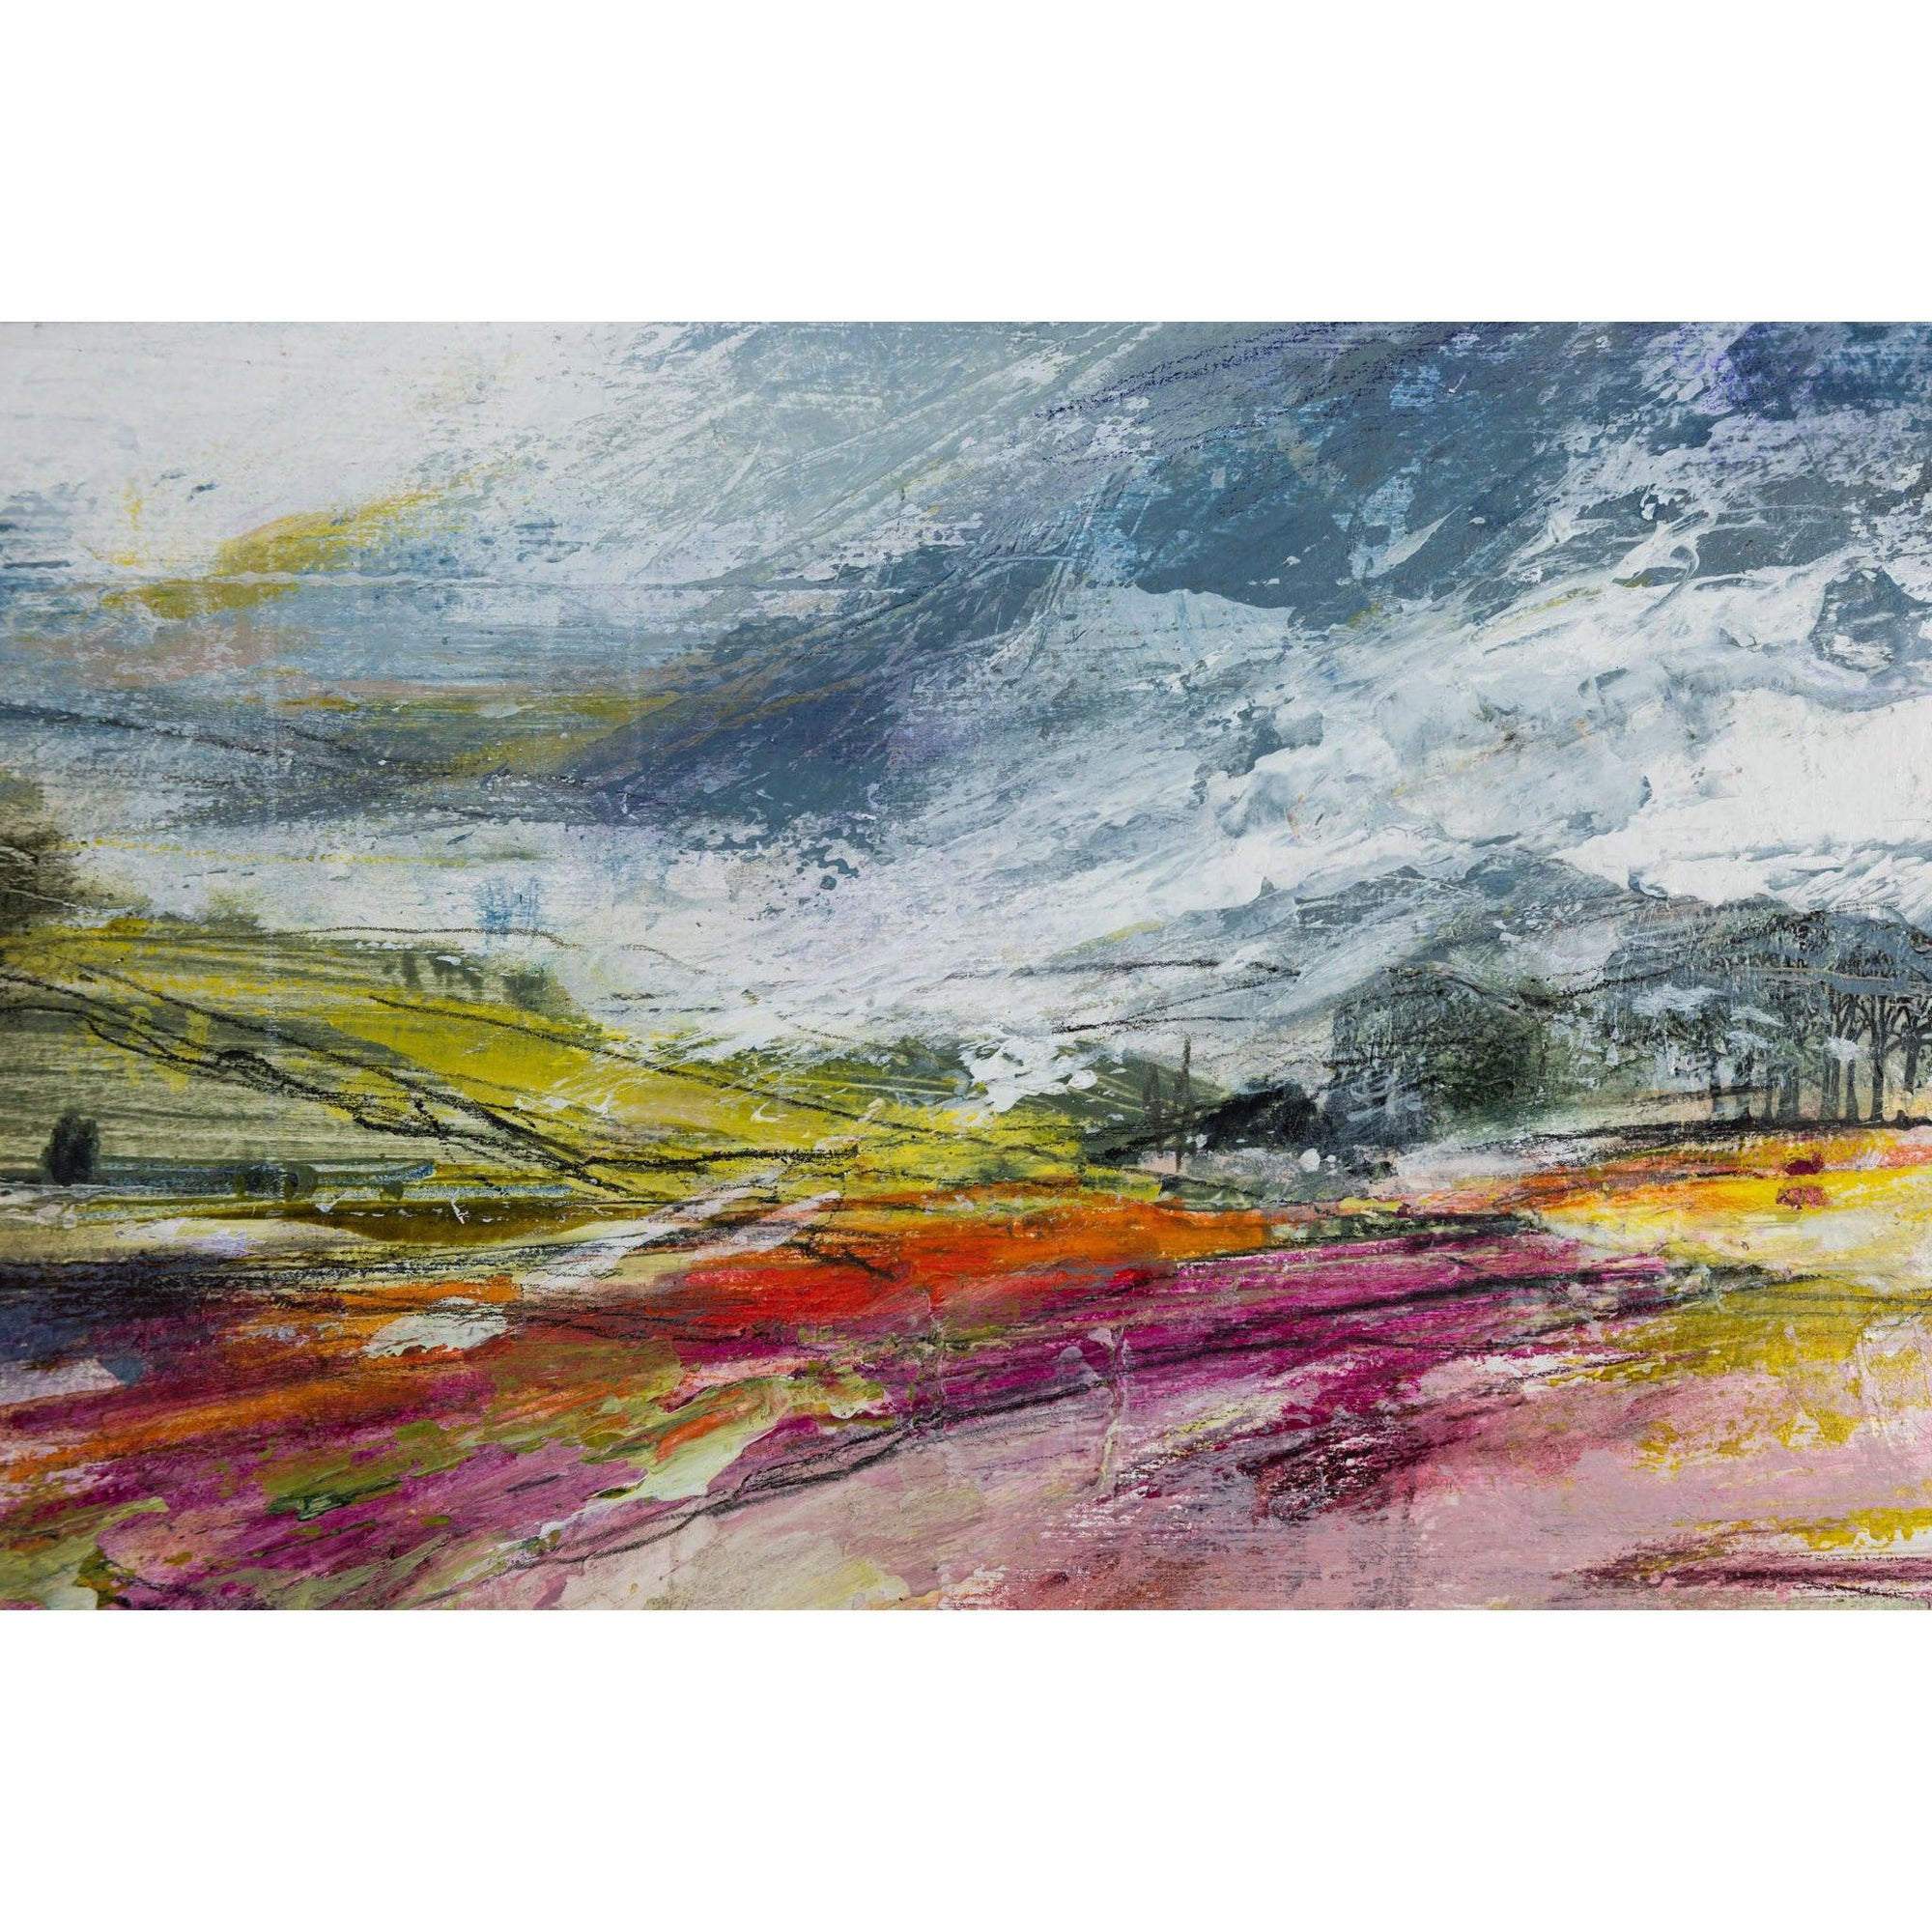 'Fertile land - Combeshead' mixed media original by Sarah Pooley, available at Padstow Gallery, Cornwall.